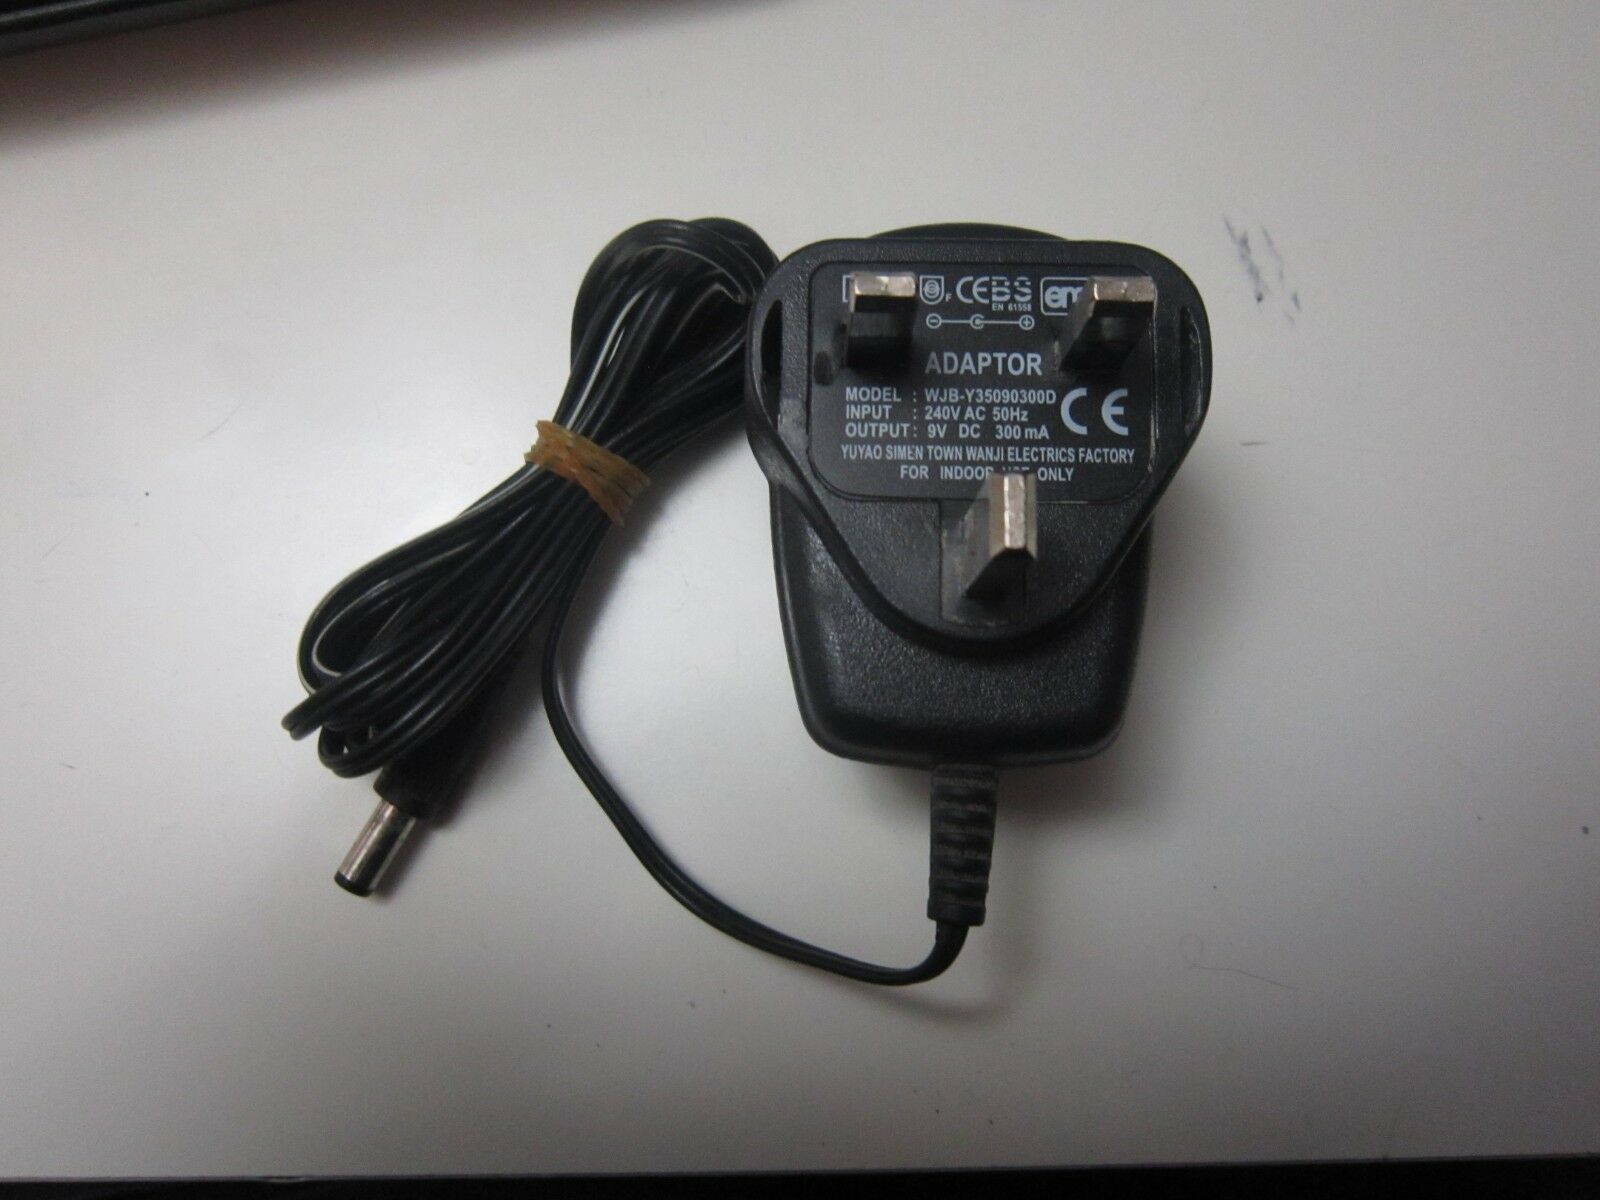 NEW ADAPTOR AK01G-0500100B 9V 300mA POWER SUPPLY CHARGER